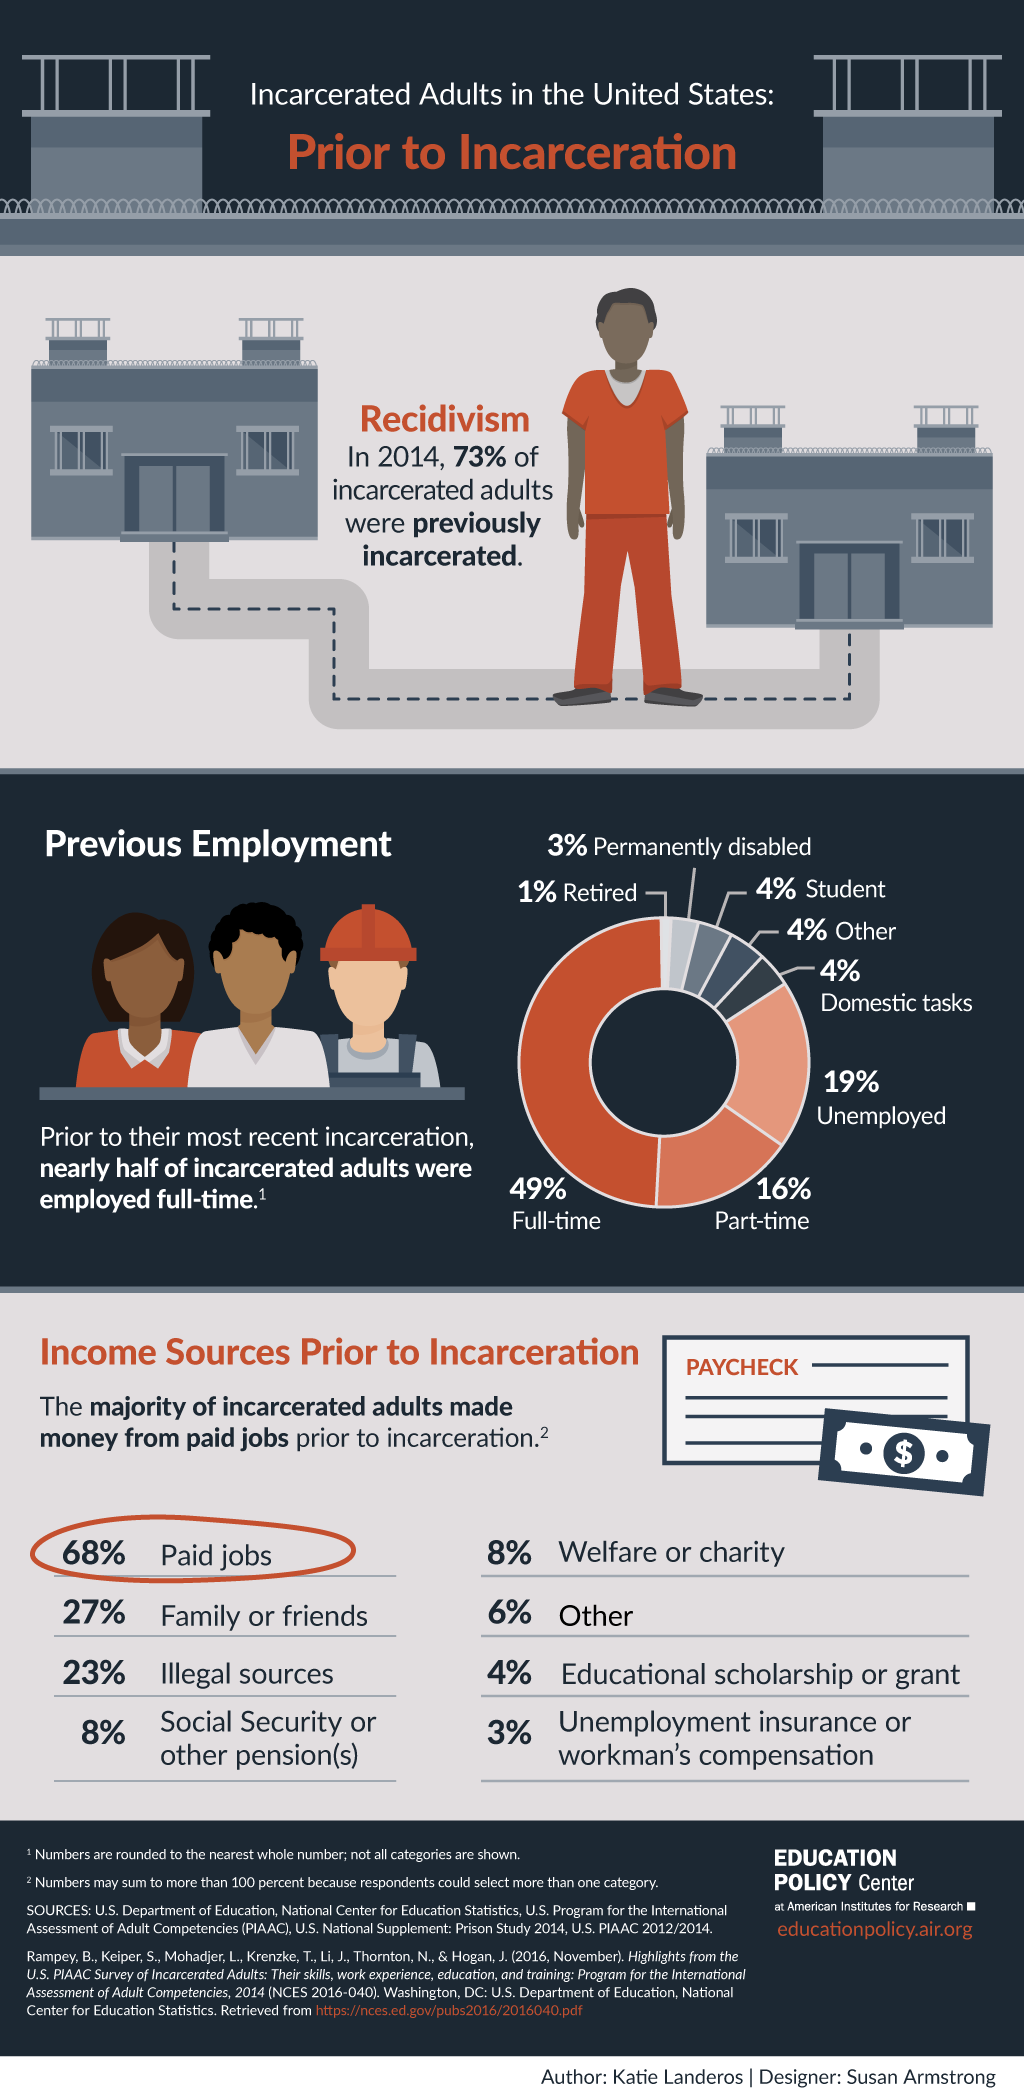 Incarcerated Adults in the United States: Prior to Incarceration (Copy)